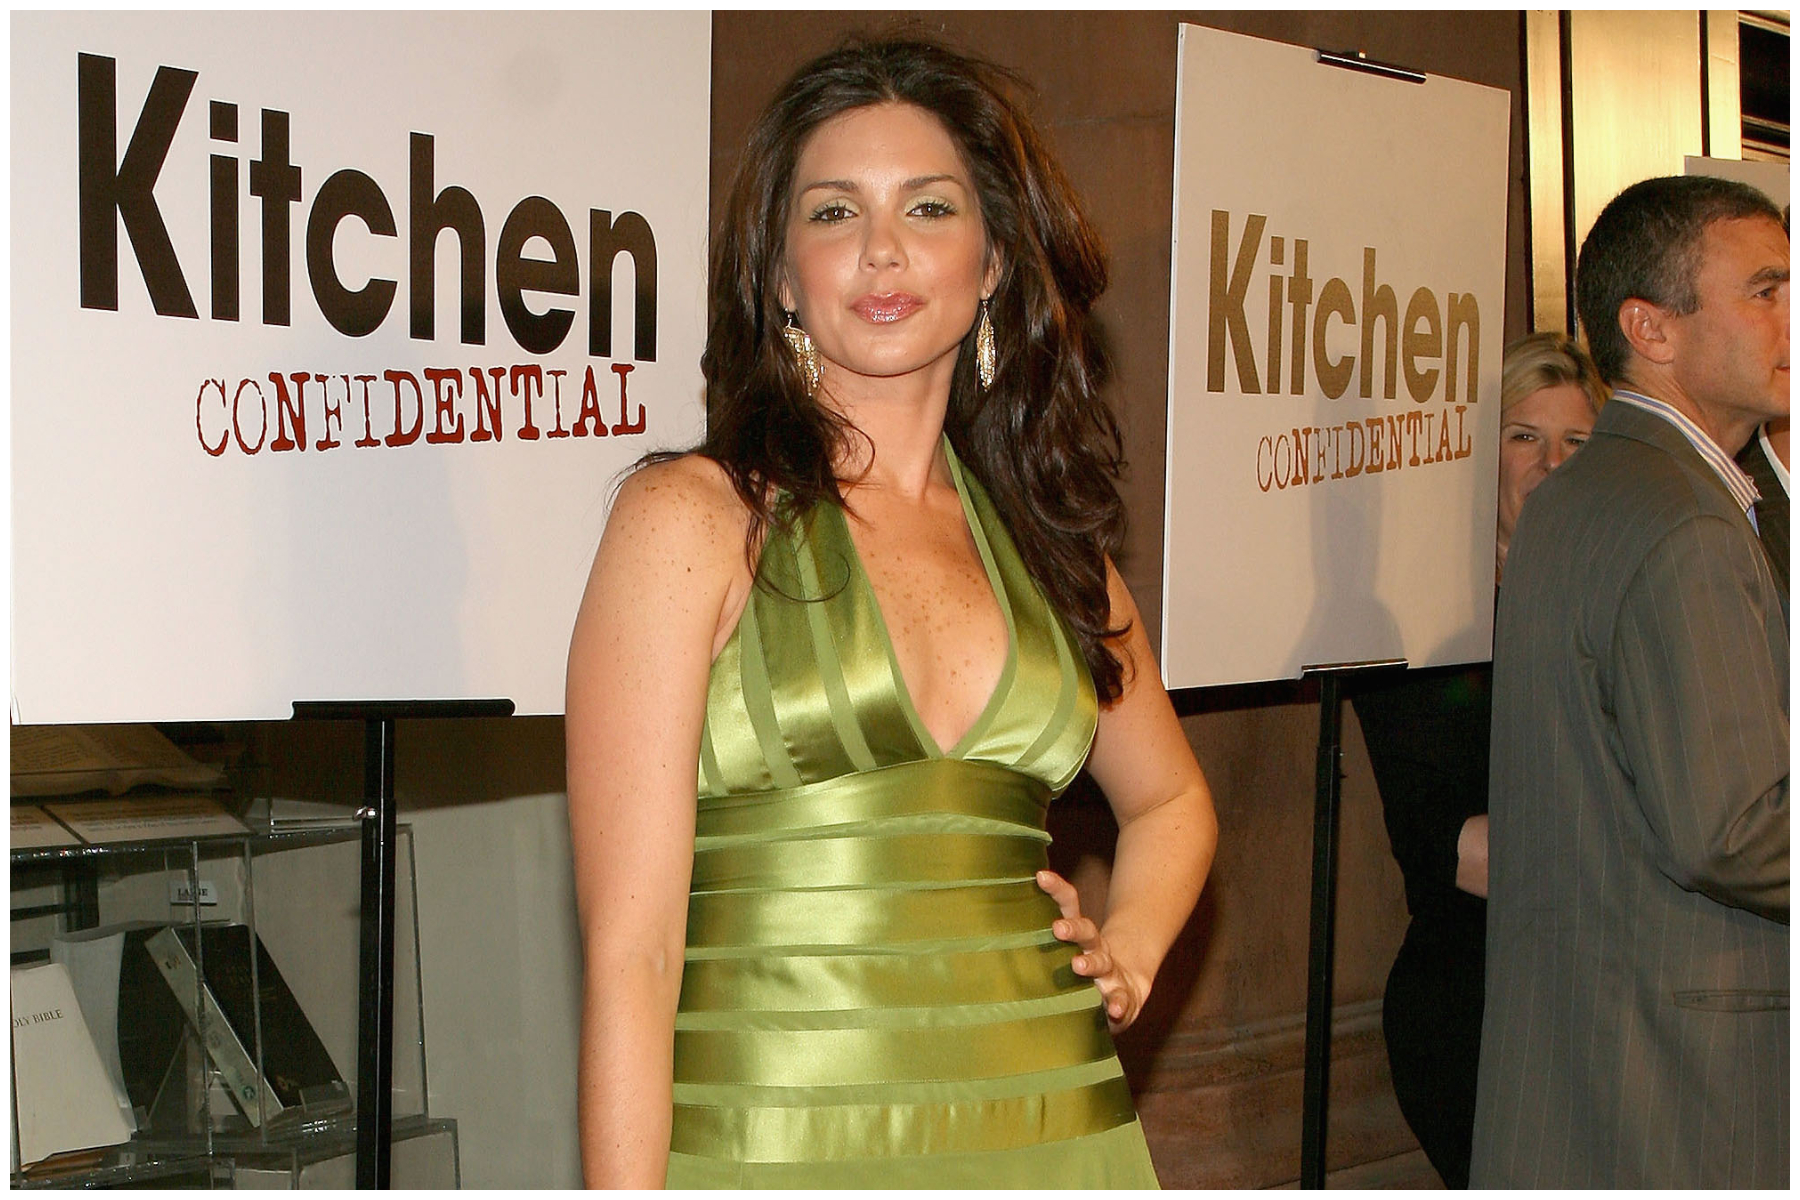 Tessie Santiago arrives for the premiere Party For the New Fox TV Show "Kitchen Confidential" at Brasserie Las Halles